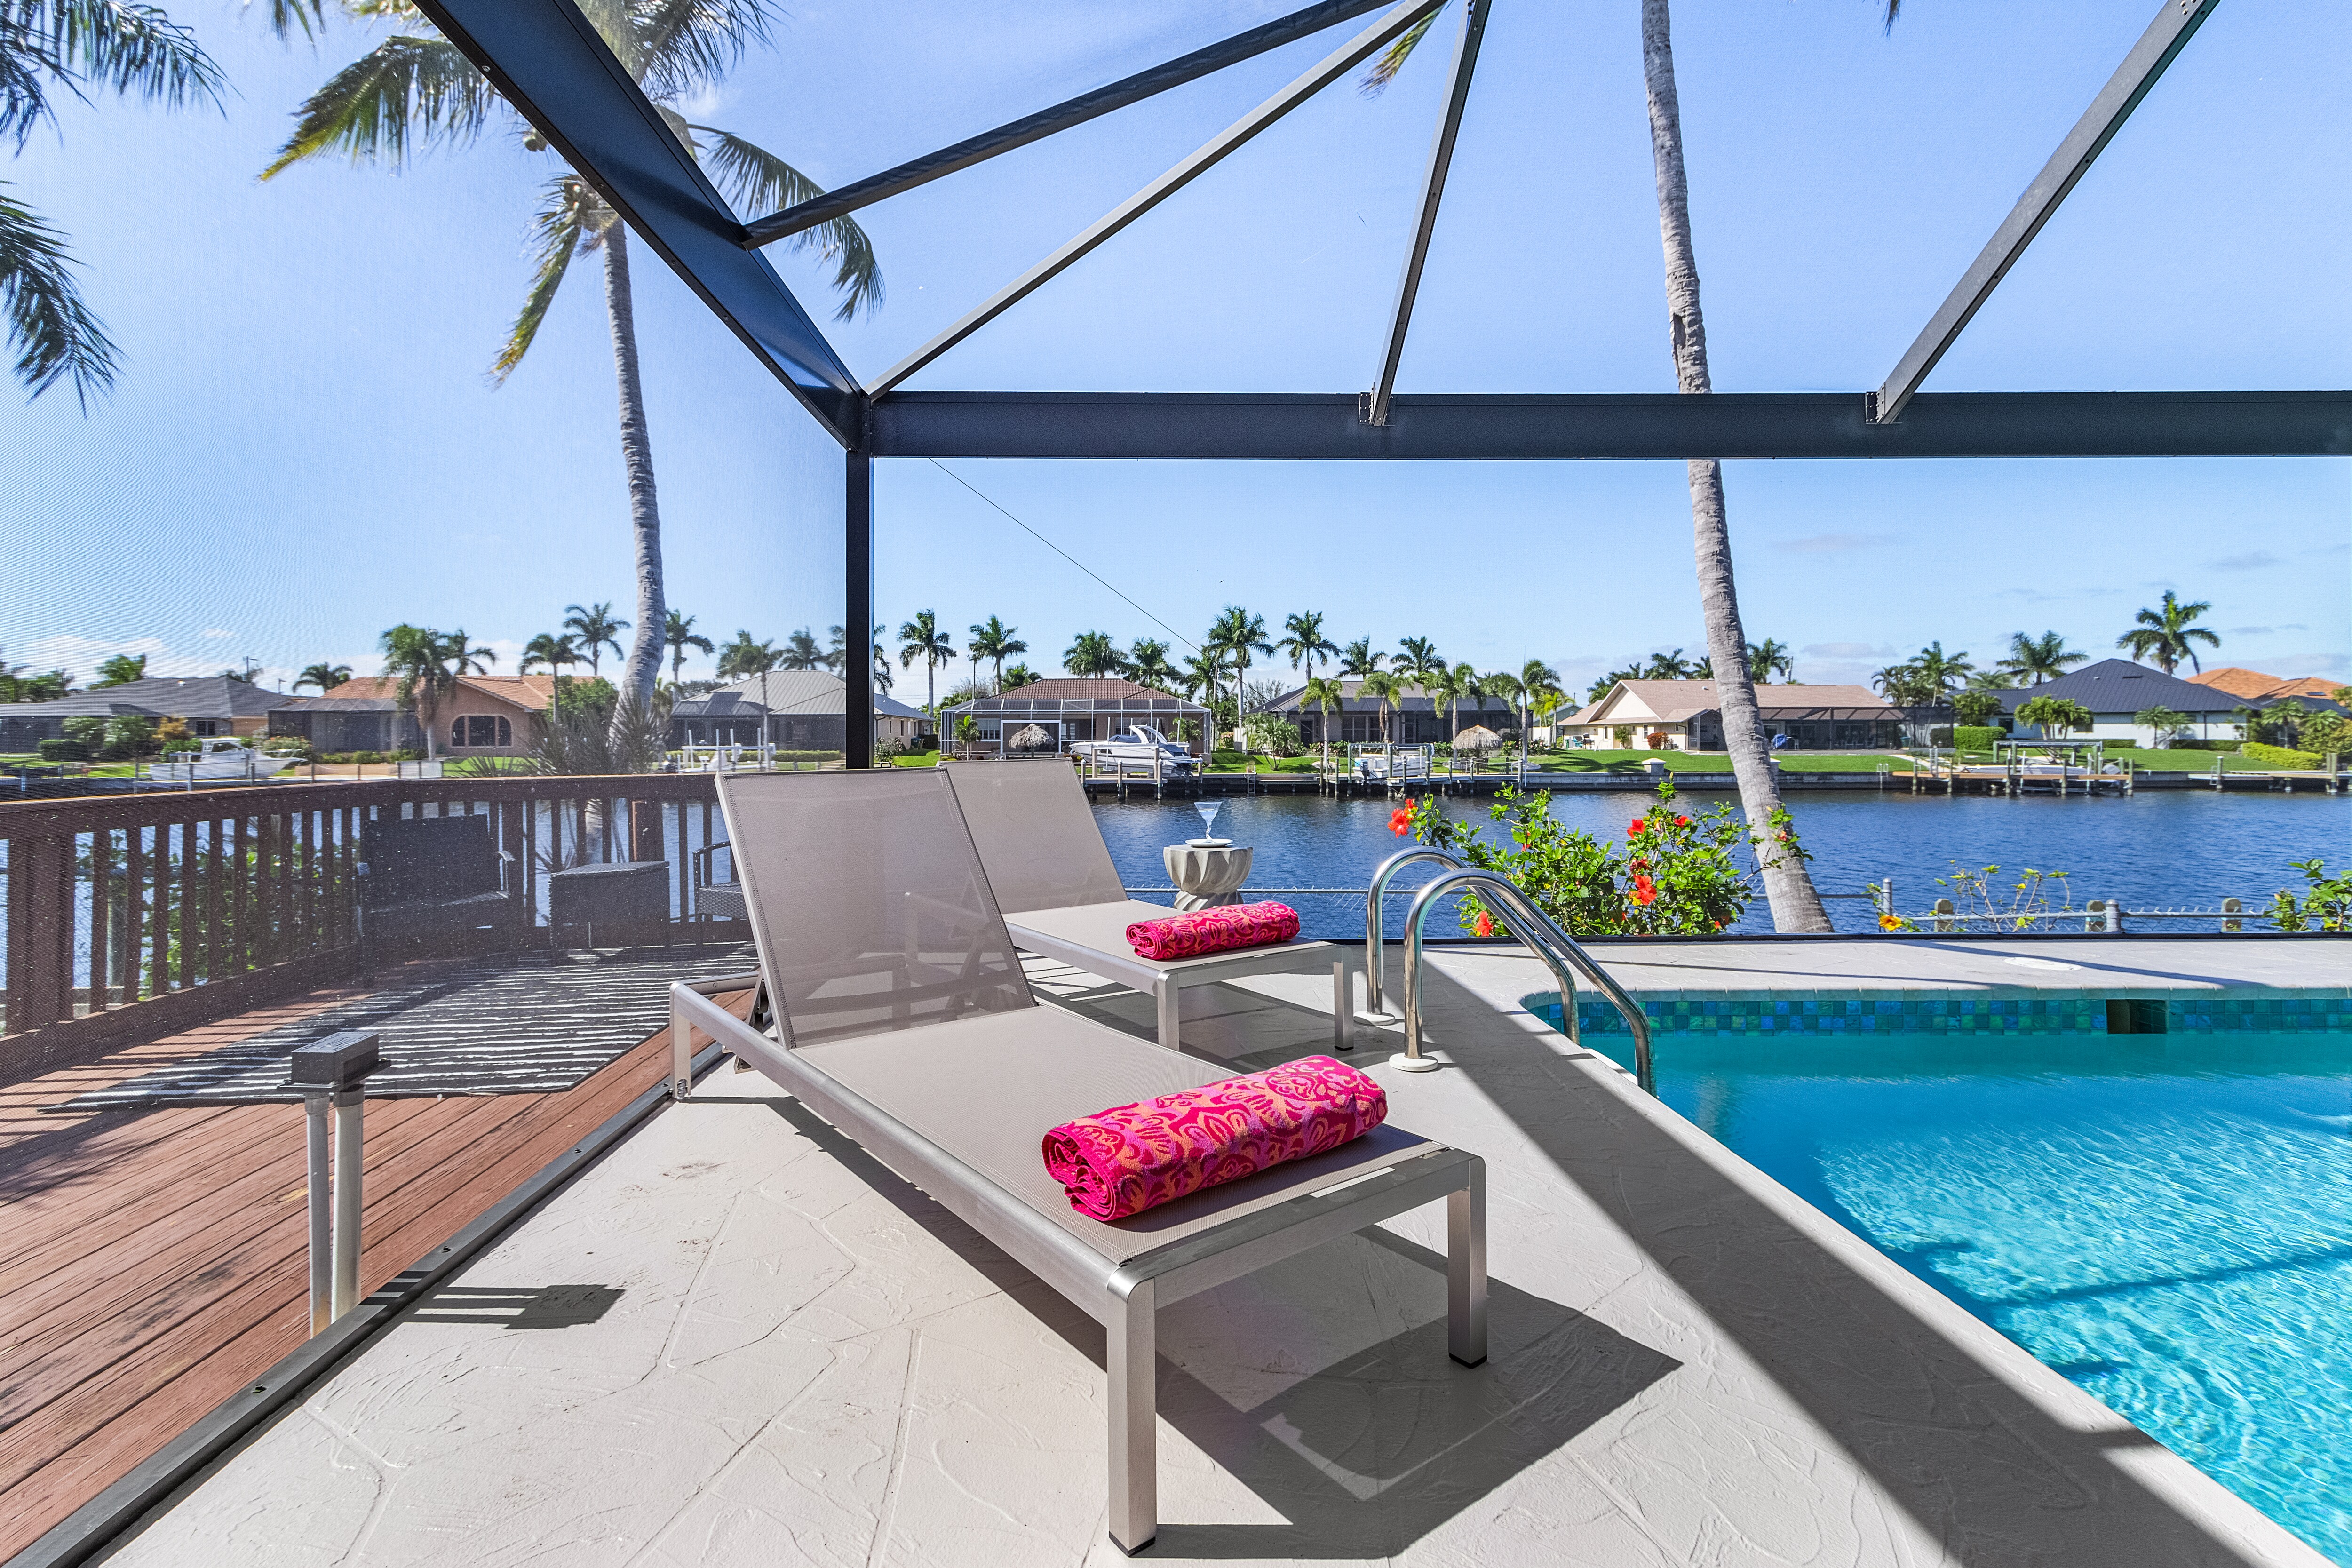 Property Image 1 - The Palms, Cape Coral